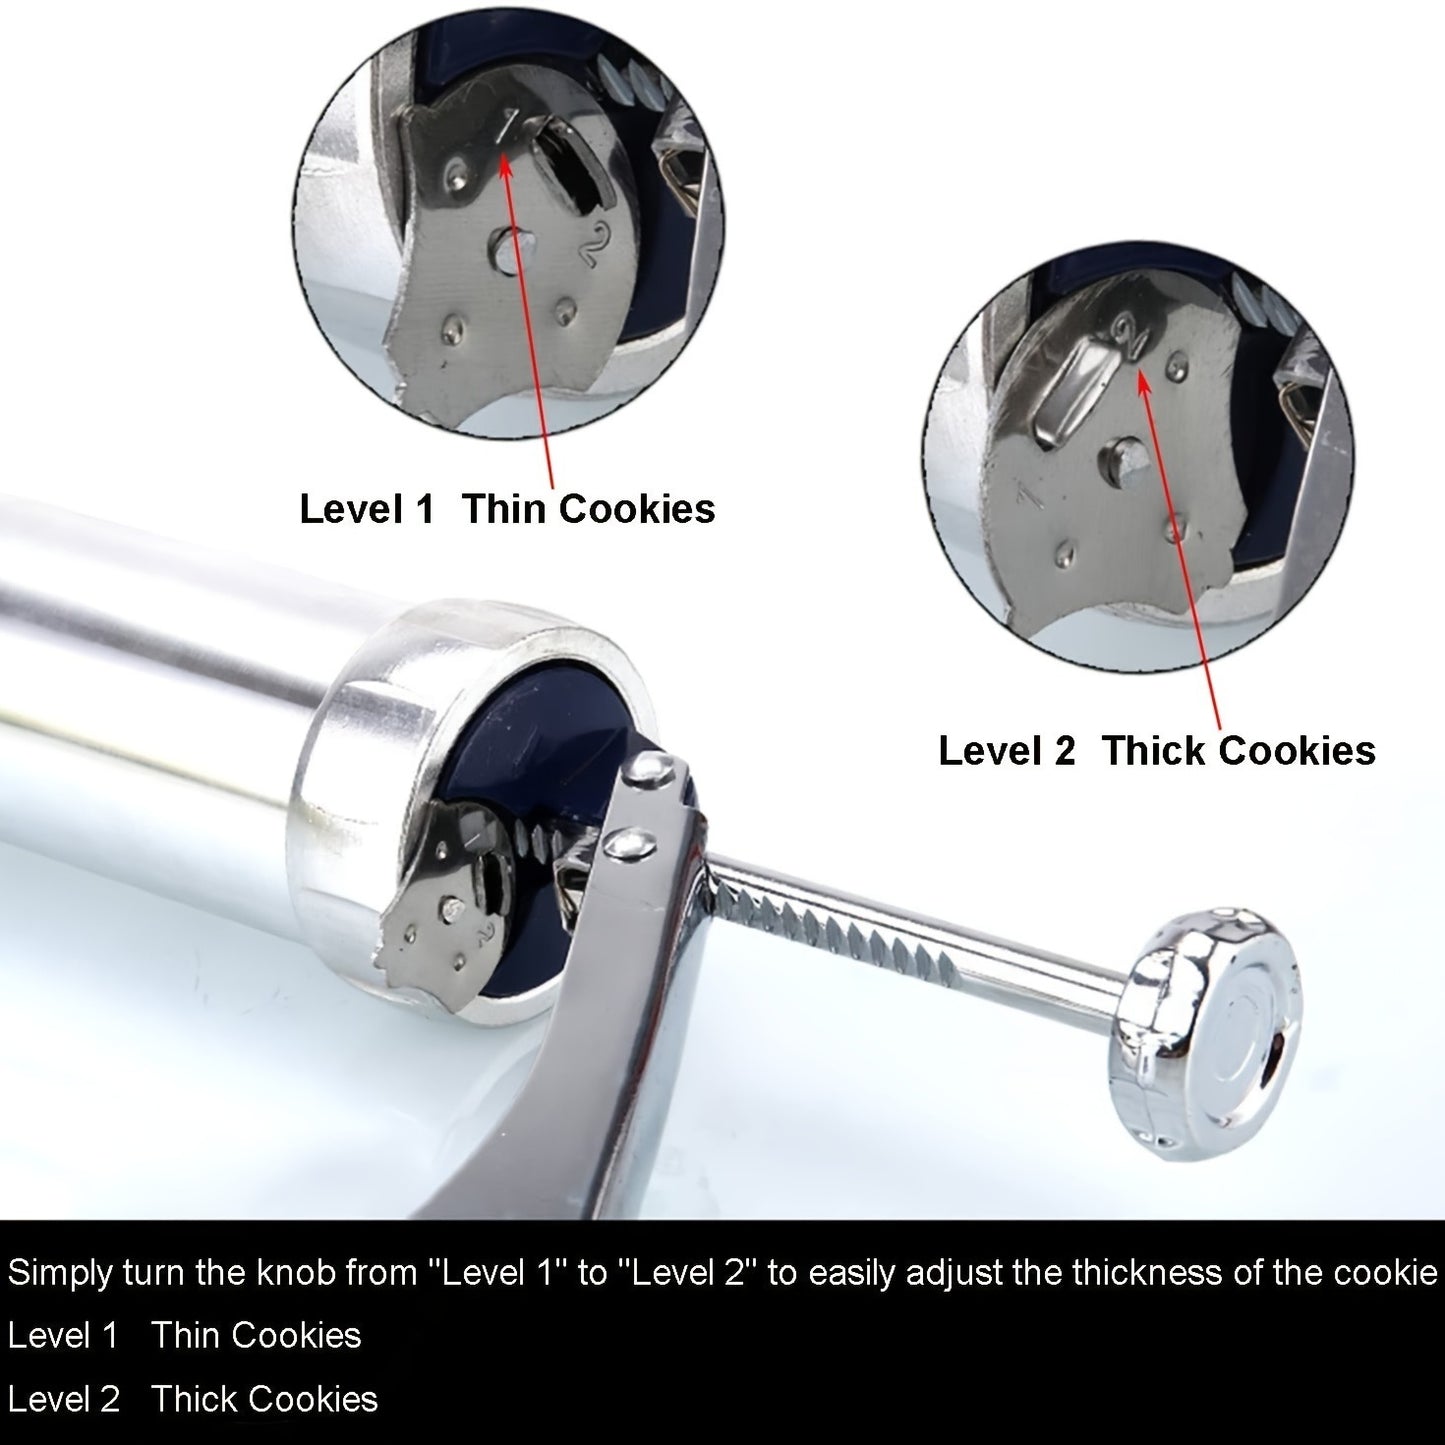 1 Set; Cookie Press Gun Kit; Includes 20 Cookie Dies And 4 Stainless Steel Nozzle For DIY Biscuit Maker And Decoration Christmas Cookie Making; Kitchen Accessories